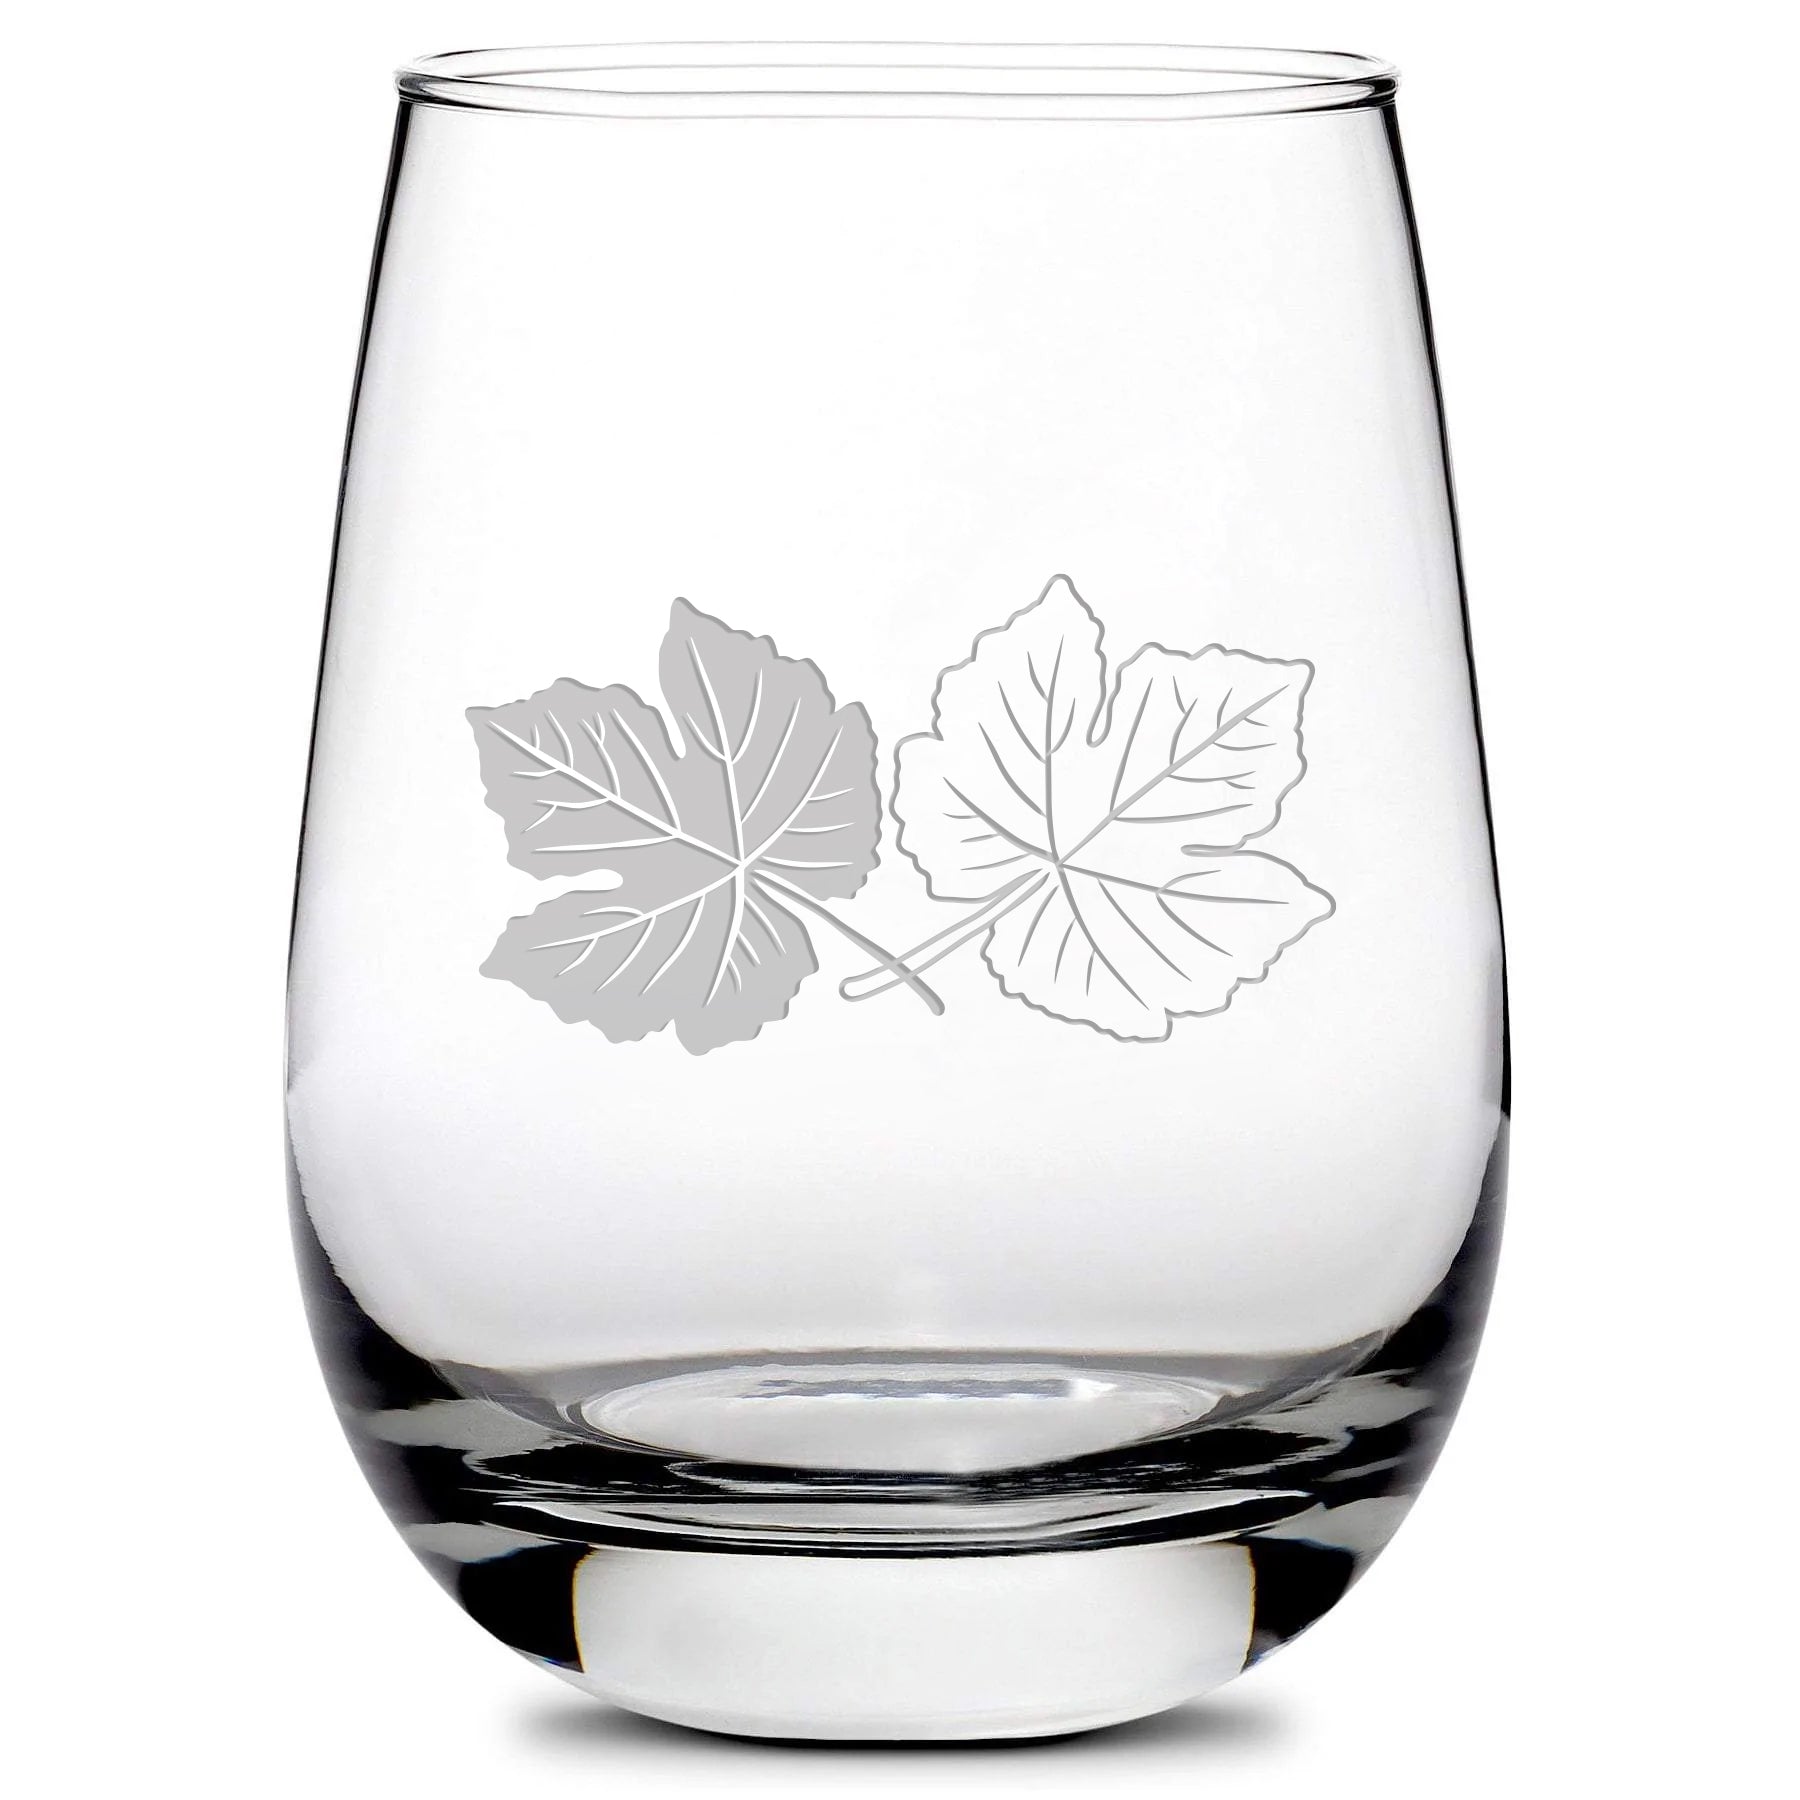 Premium Stemless Wine Glass, Couple of Grape Leaves, Hand Etched, Made in USA, 16oz